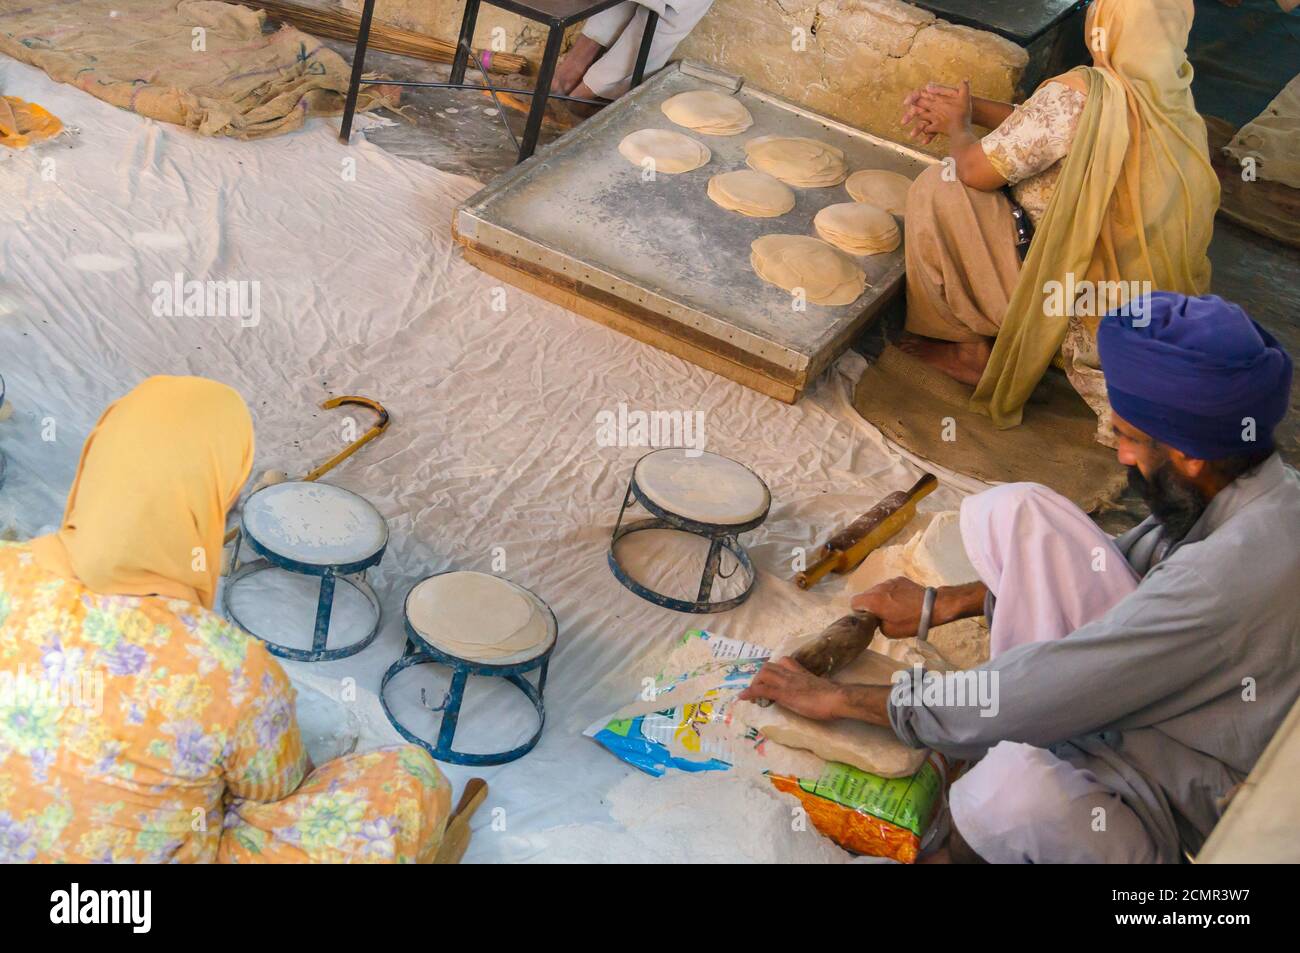 Amritsar, India - November 21, 2011: Unknown Indian people cook national bread for a free meal for pilgrims. Golden Temple in Amritsar, Punjab, India. Stock Photo